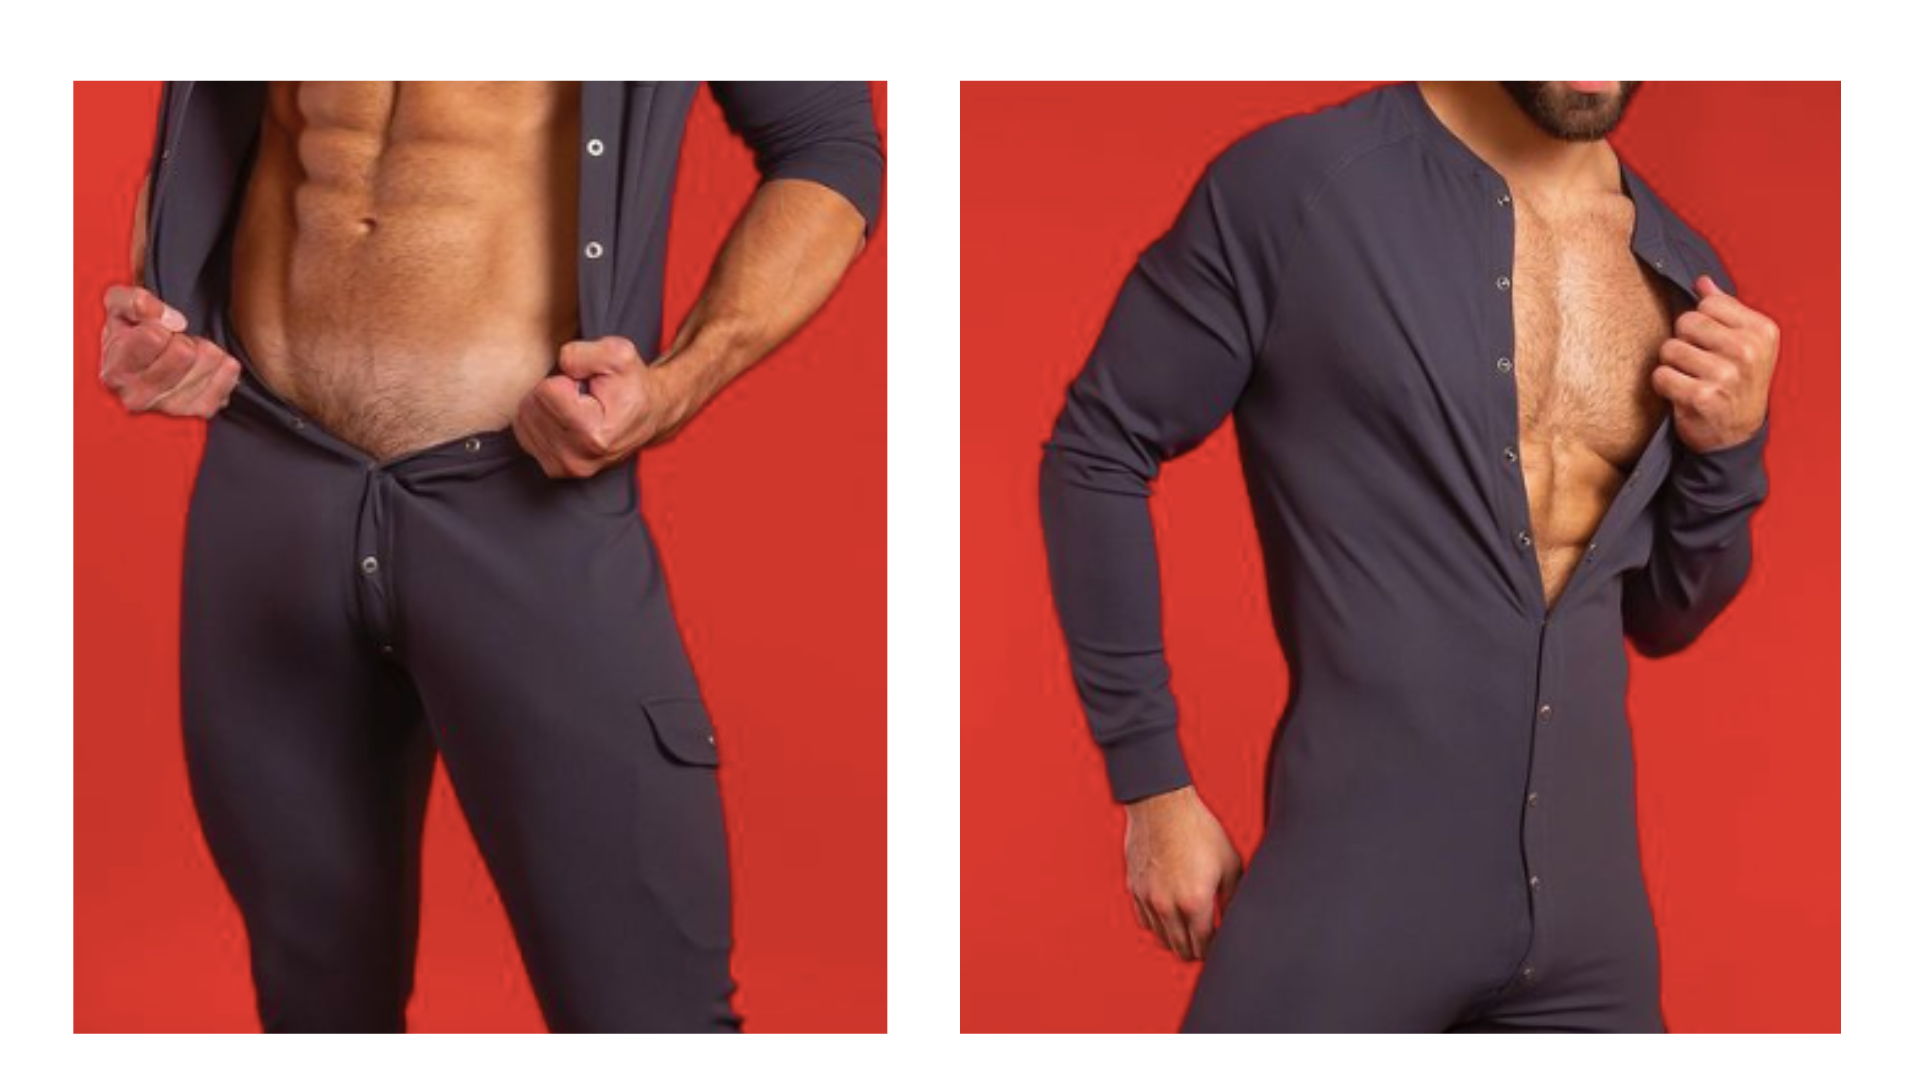 Men Bodysuits Are the New Trend_ How to Wear Them and Look Sexy